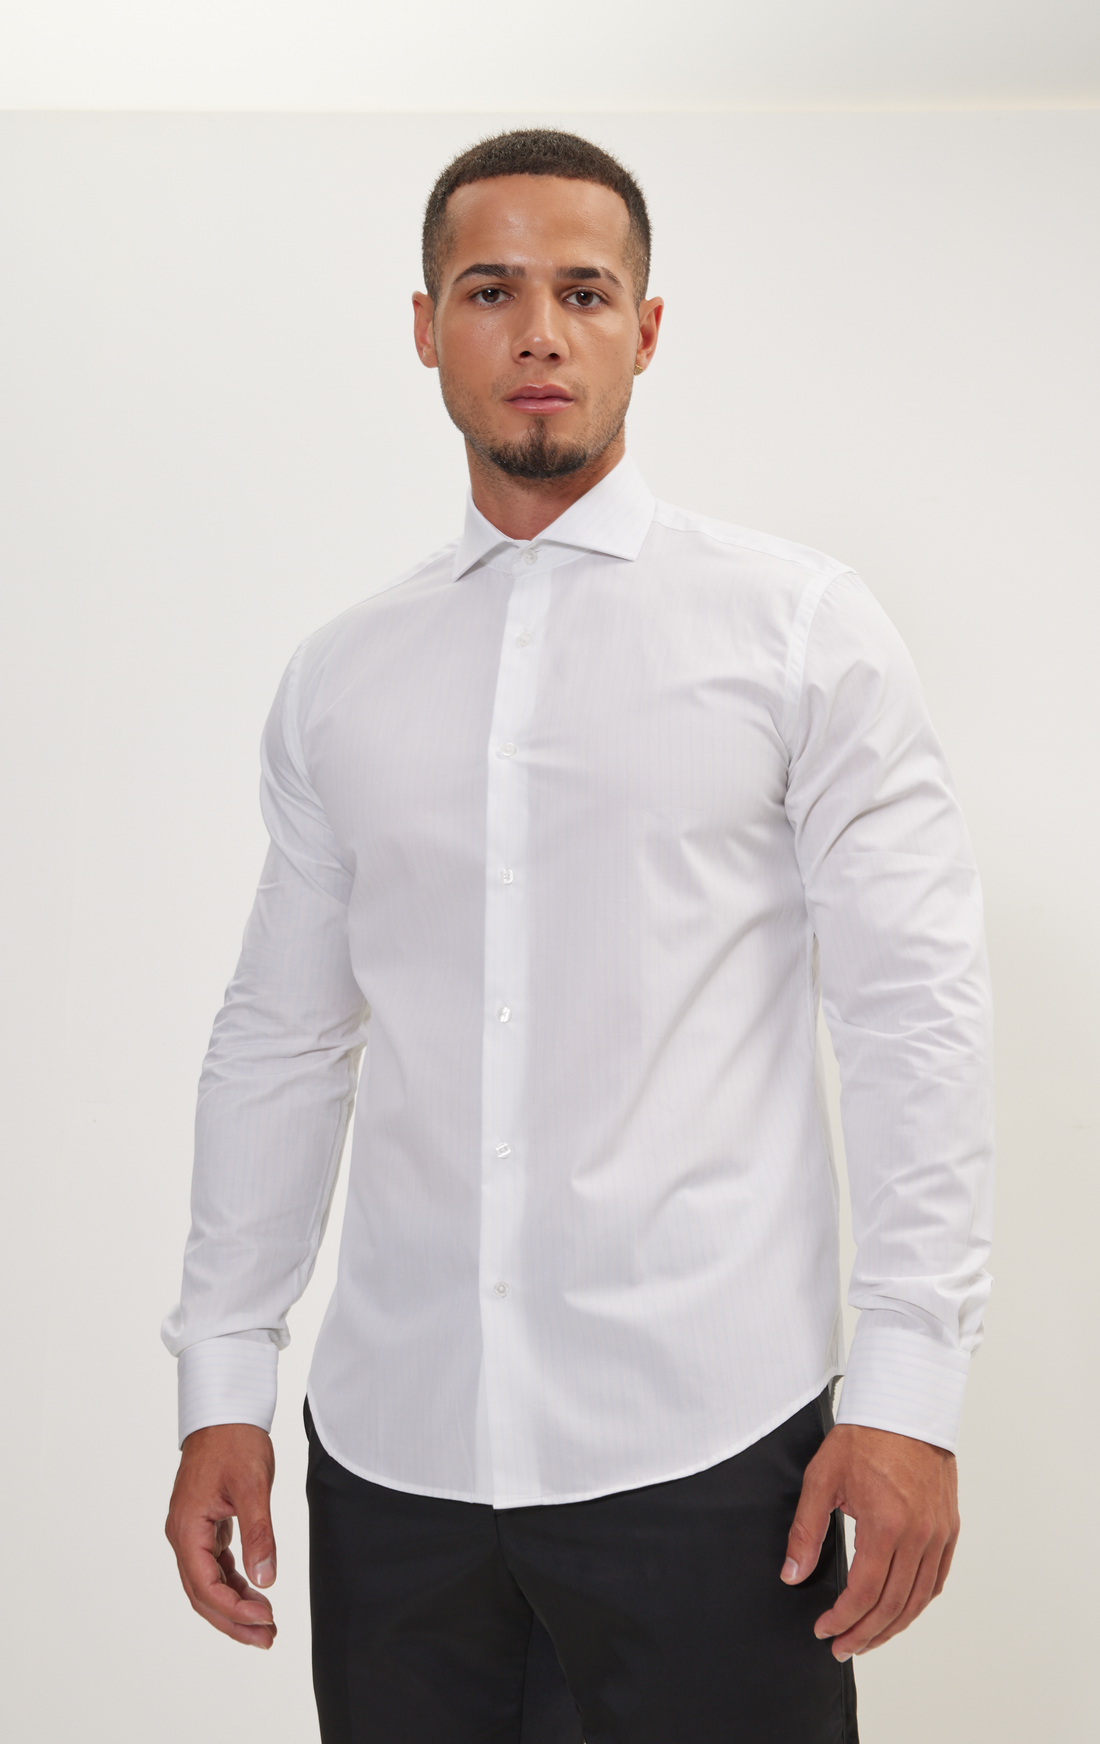 N° AN4903 PURE COTTON FRENCH PLACKET SPREAD COLLAR DRESS SHIRT - WHITE LIGHT BENGAL